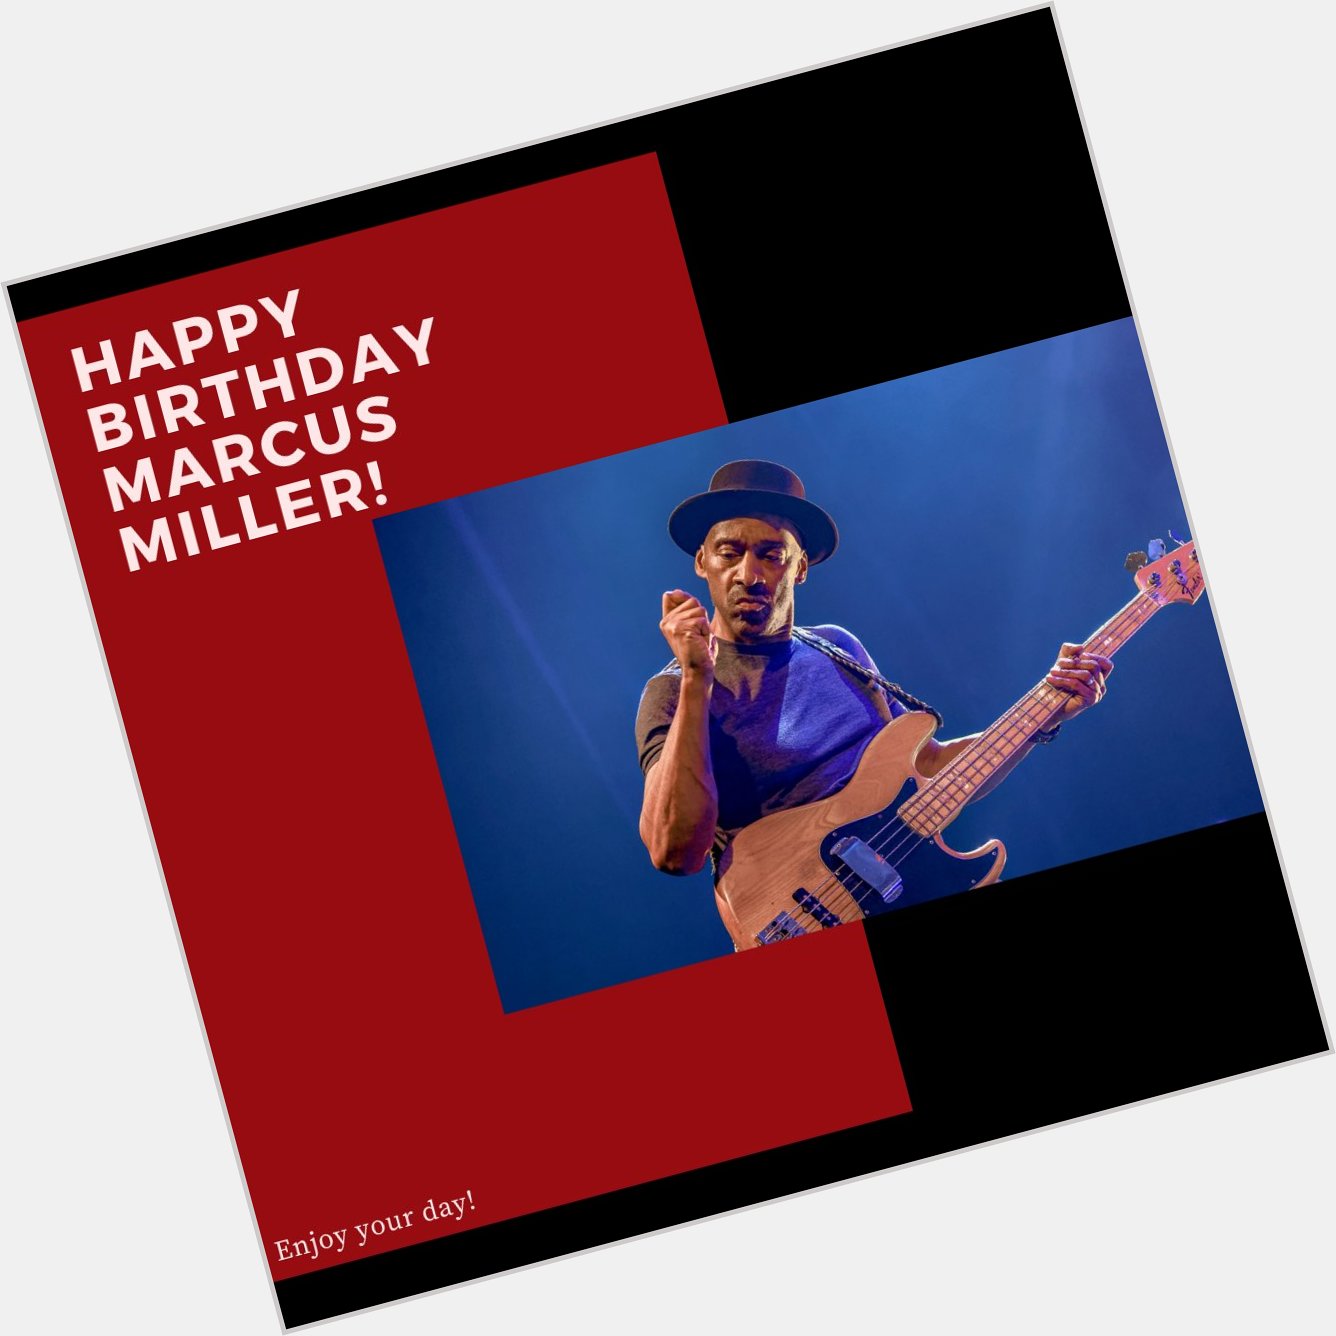 Happy Birthday to the multi-talented Marcus Miller! Enjoy your day! 